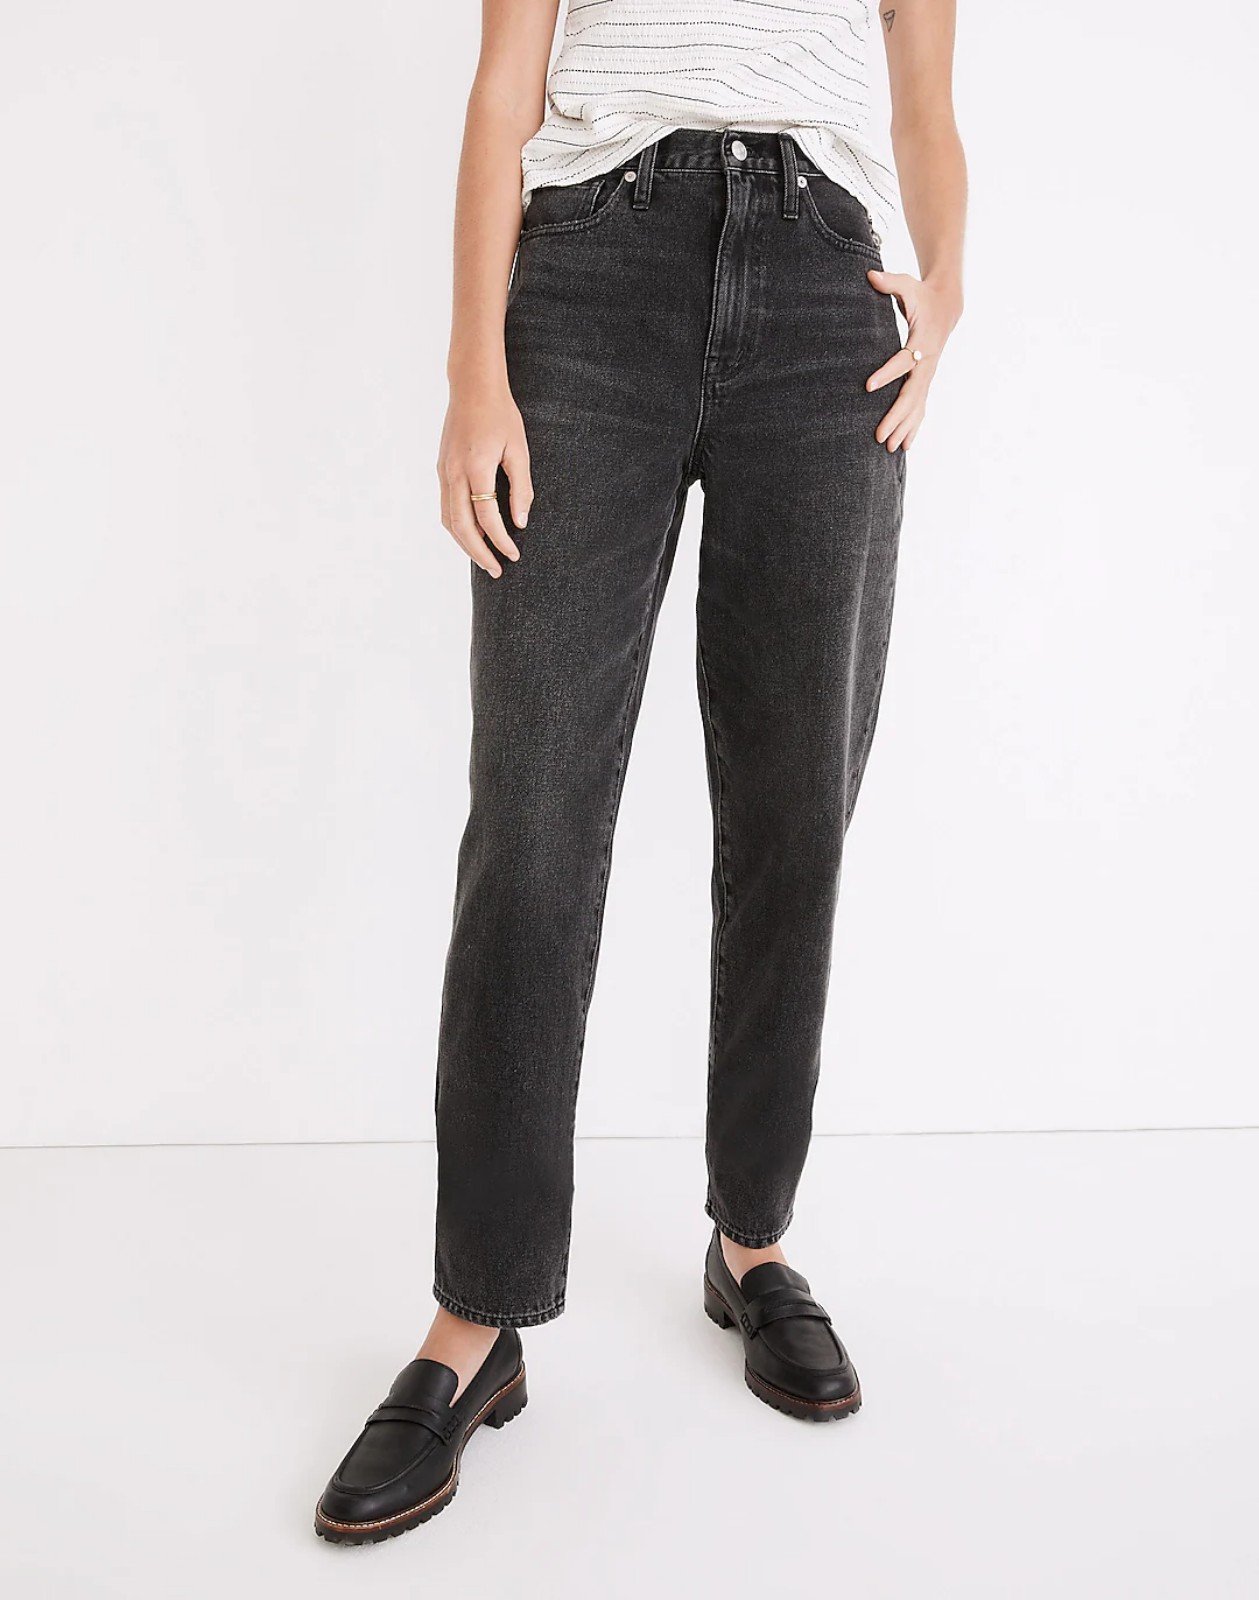 High quality Madewell Baggy Tapered Jeans in Mackinnon Wash Womens Size 26 NWT HgRXPHheY US Sale